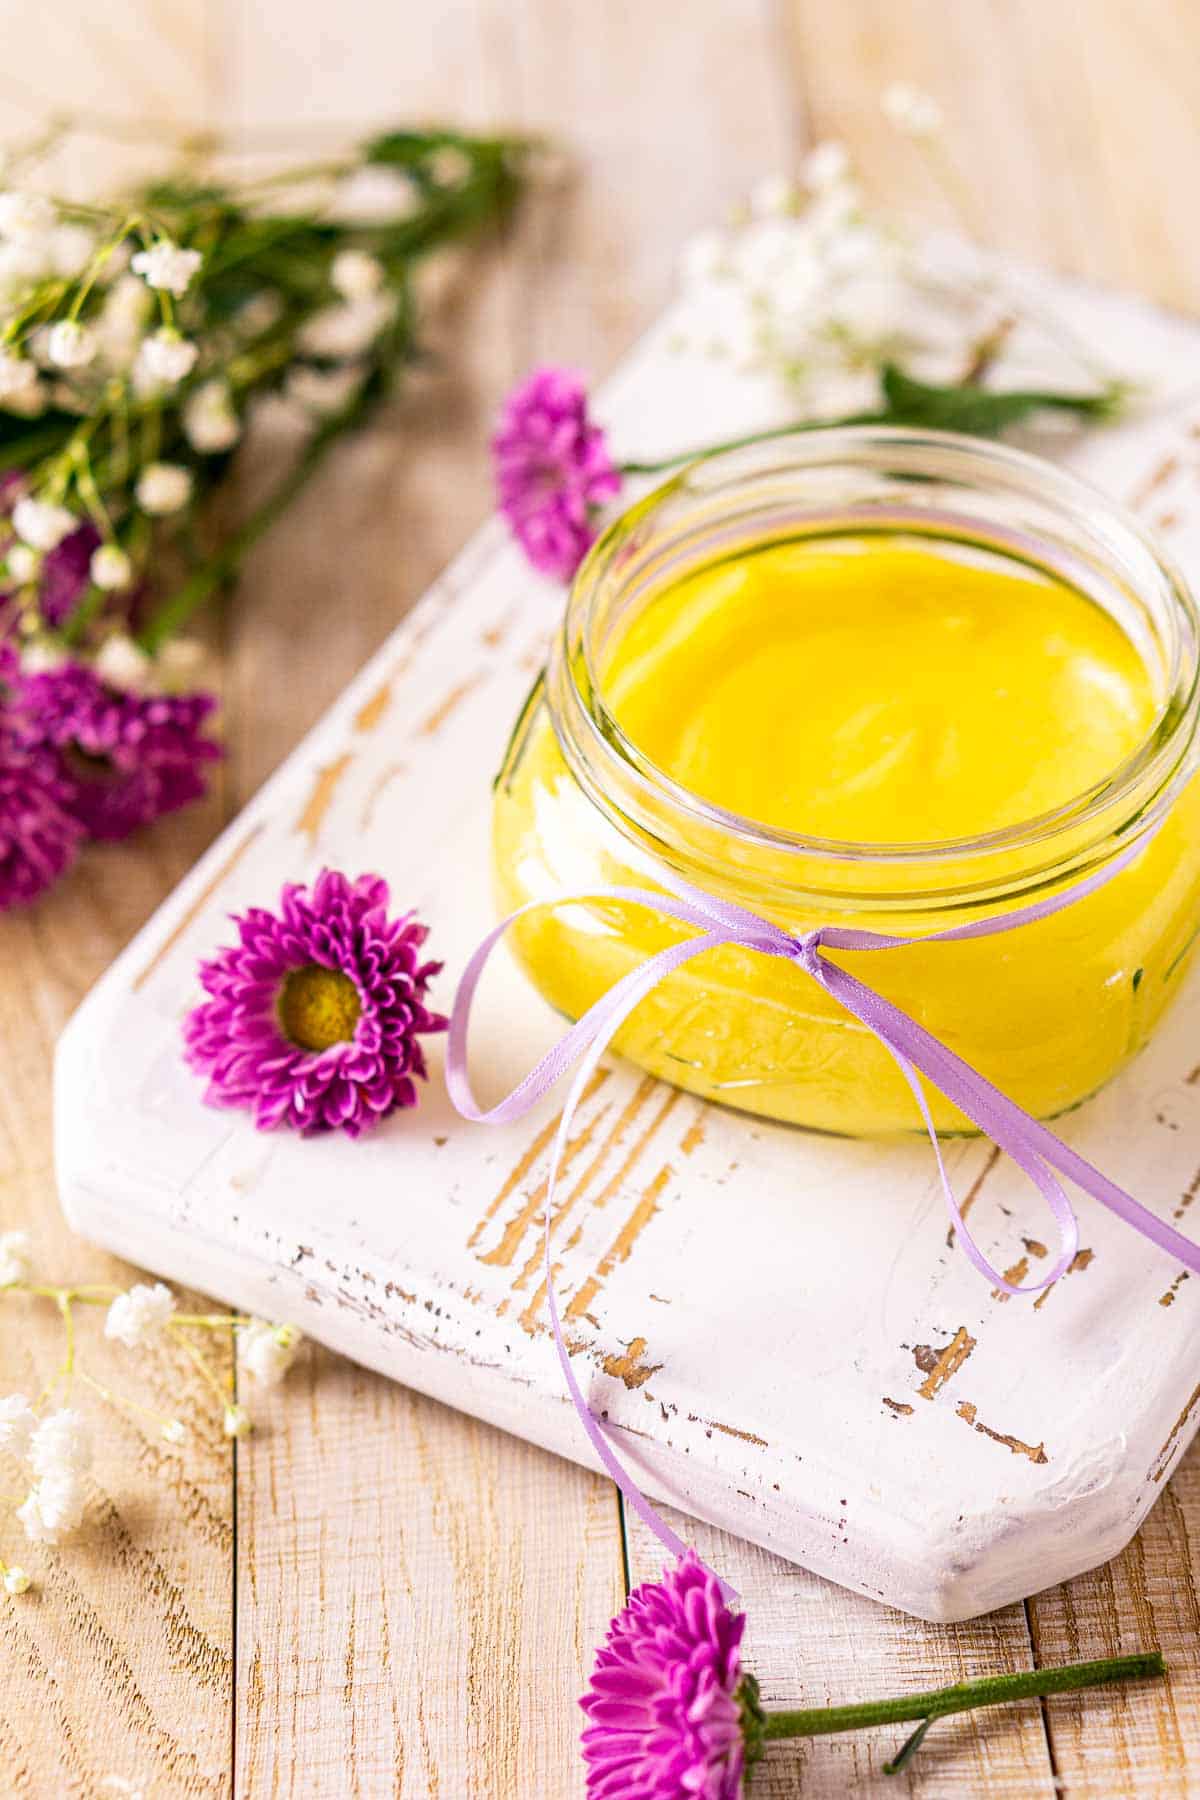 A glass jar of passion fruit curd on a white serving tray with purple and white flowers on a cream-colored wooden surface.